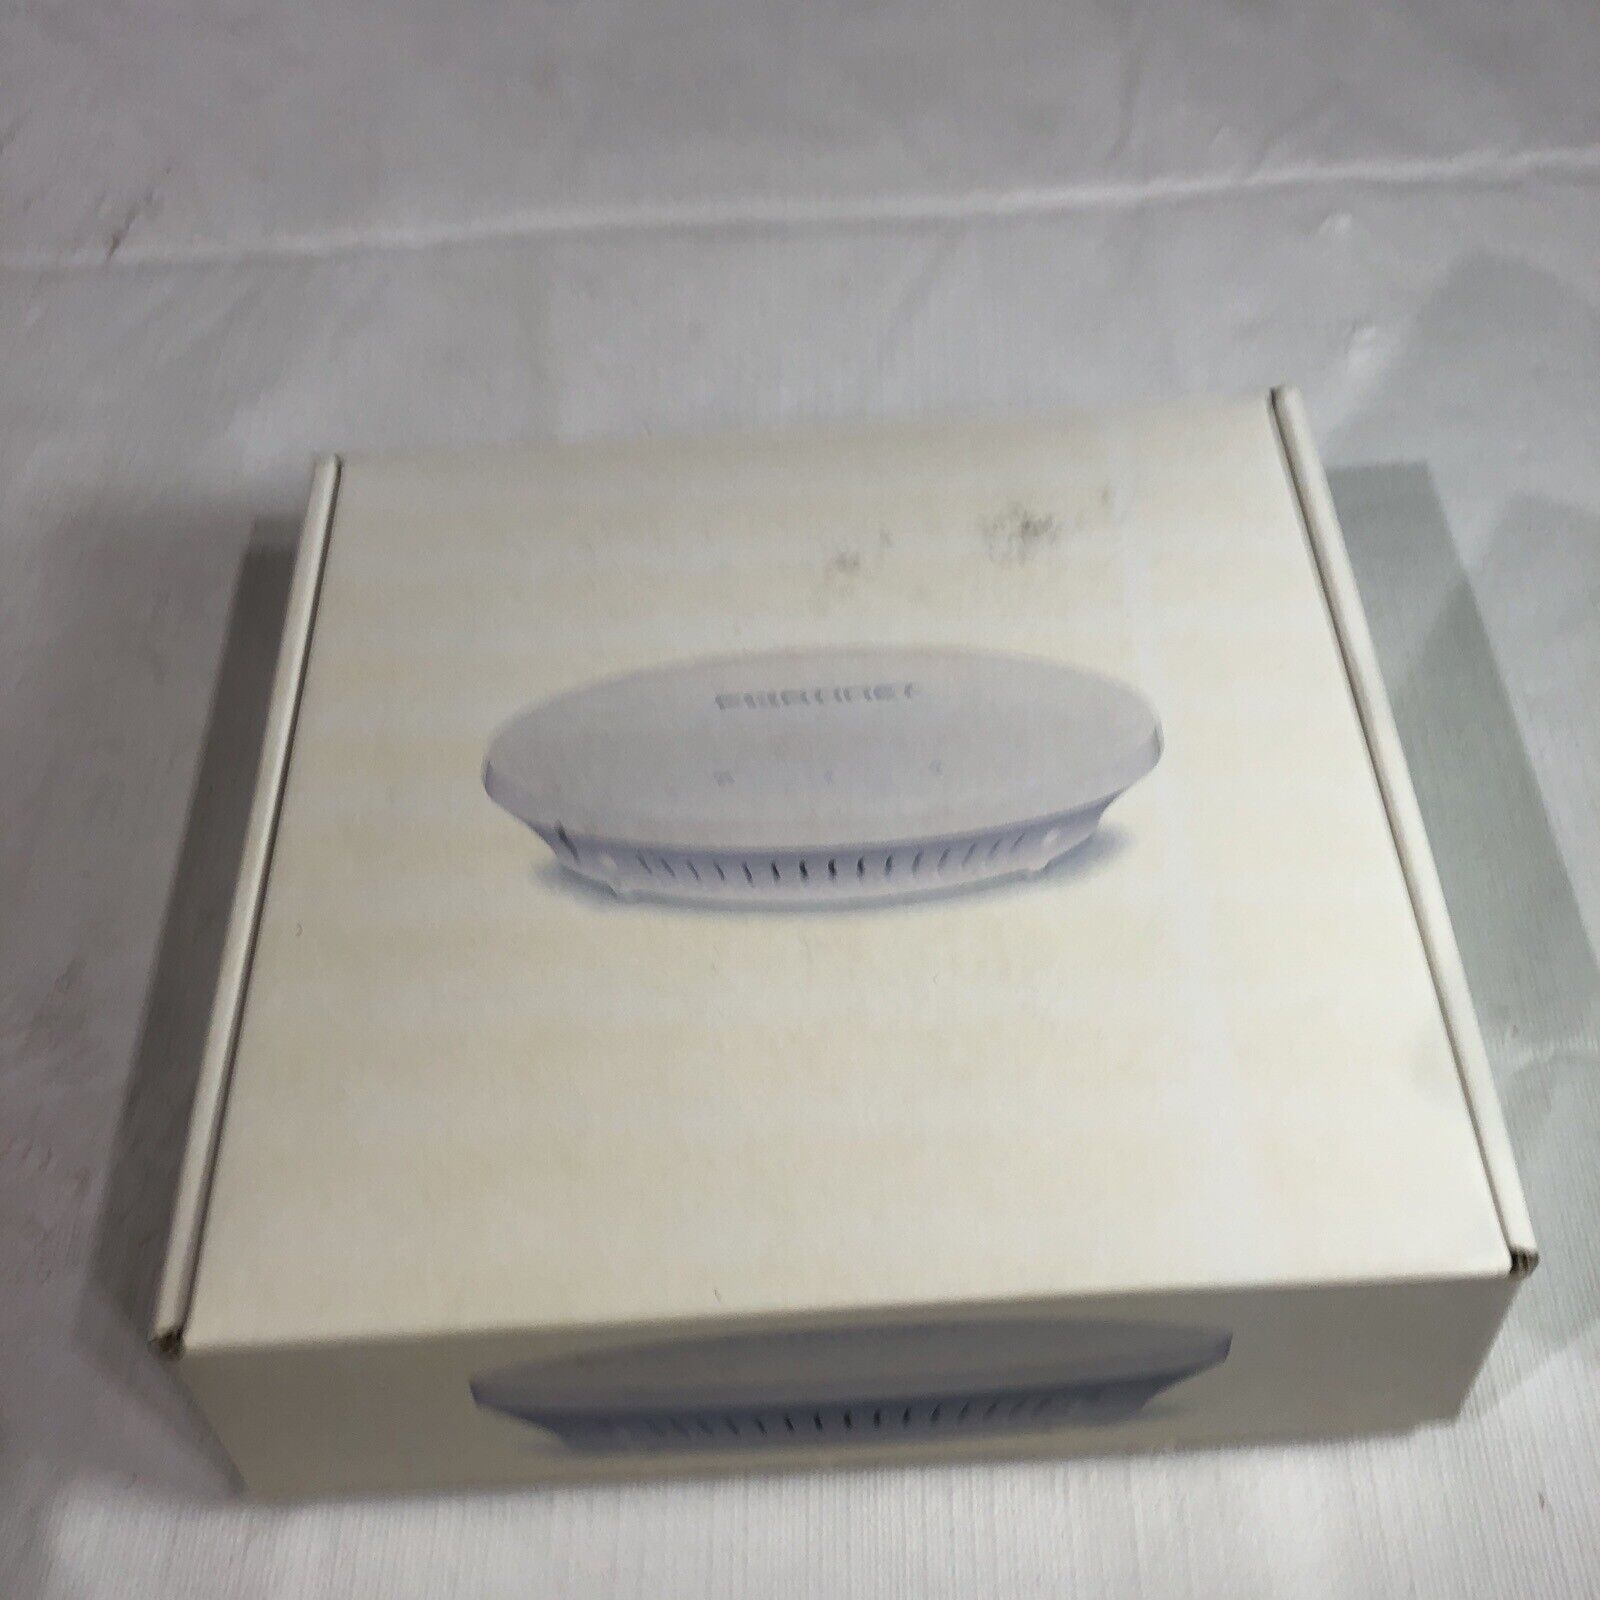 Fortinet FORTIAP-321C Wireless Access Point New 